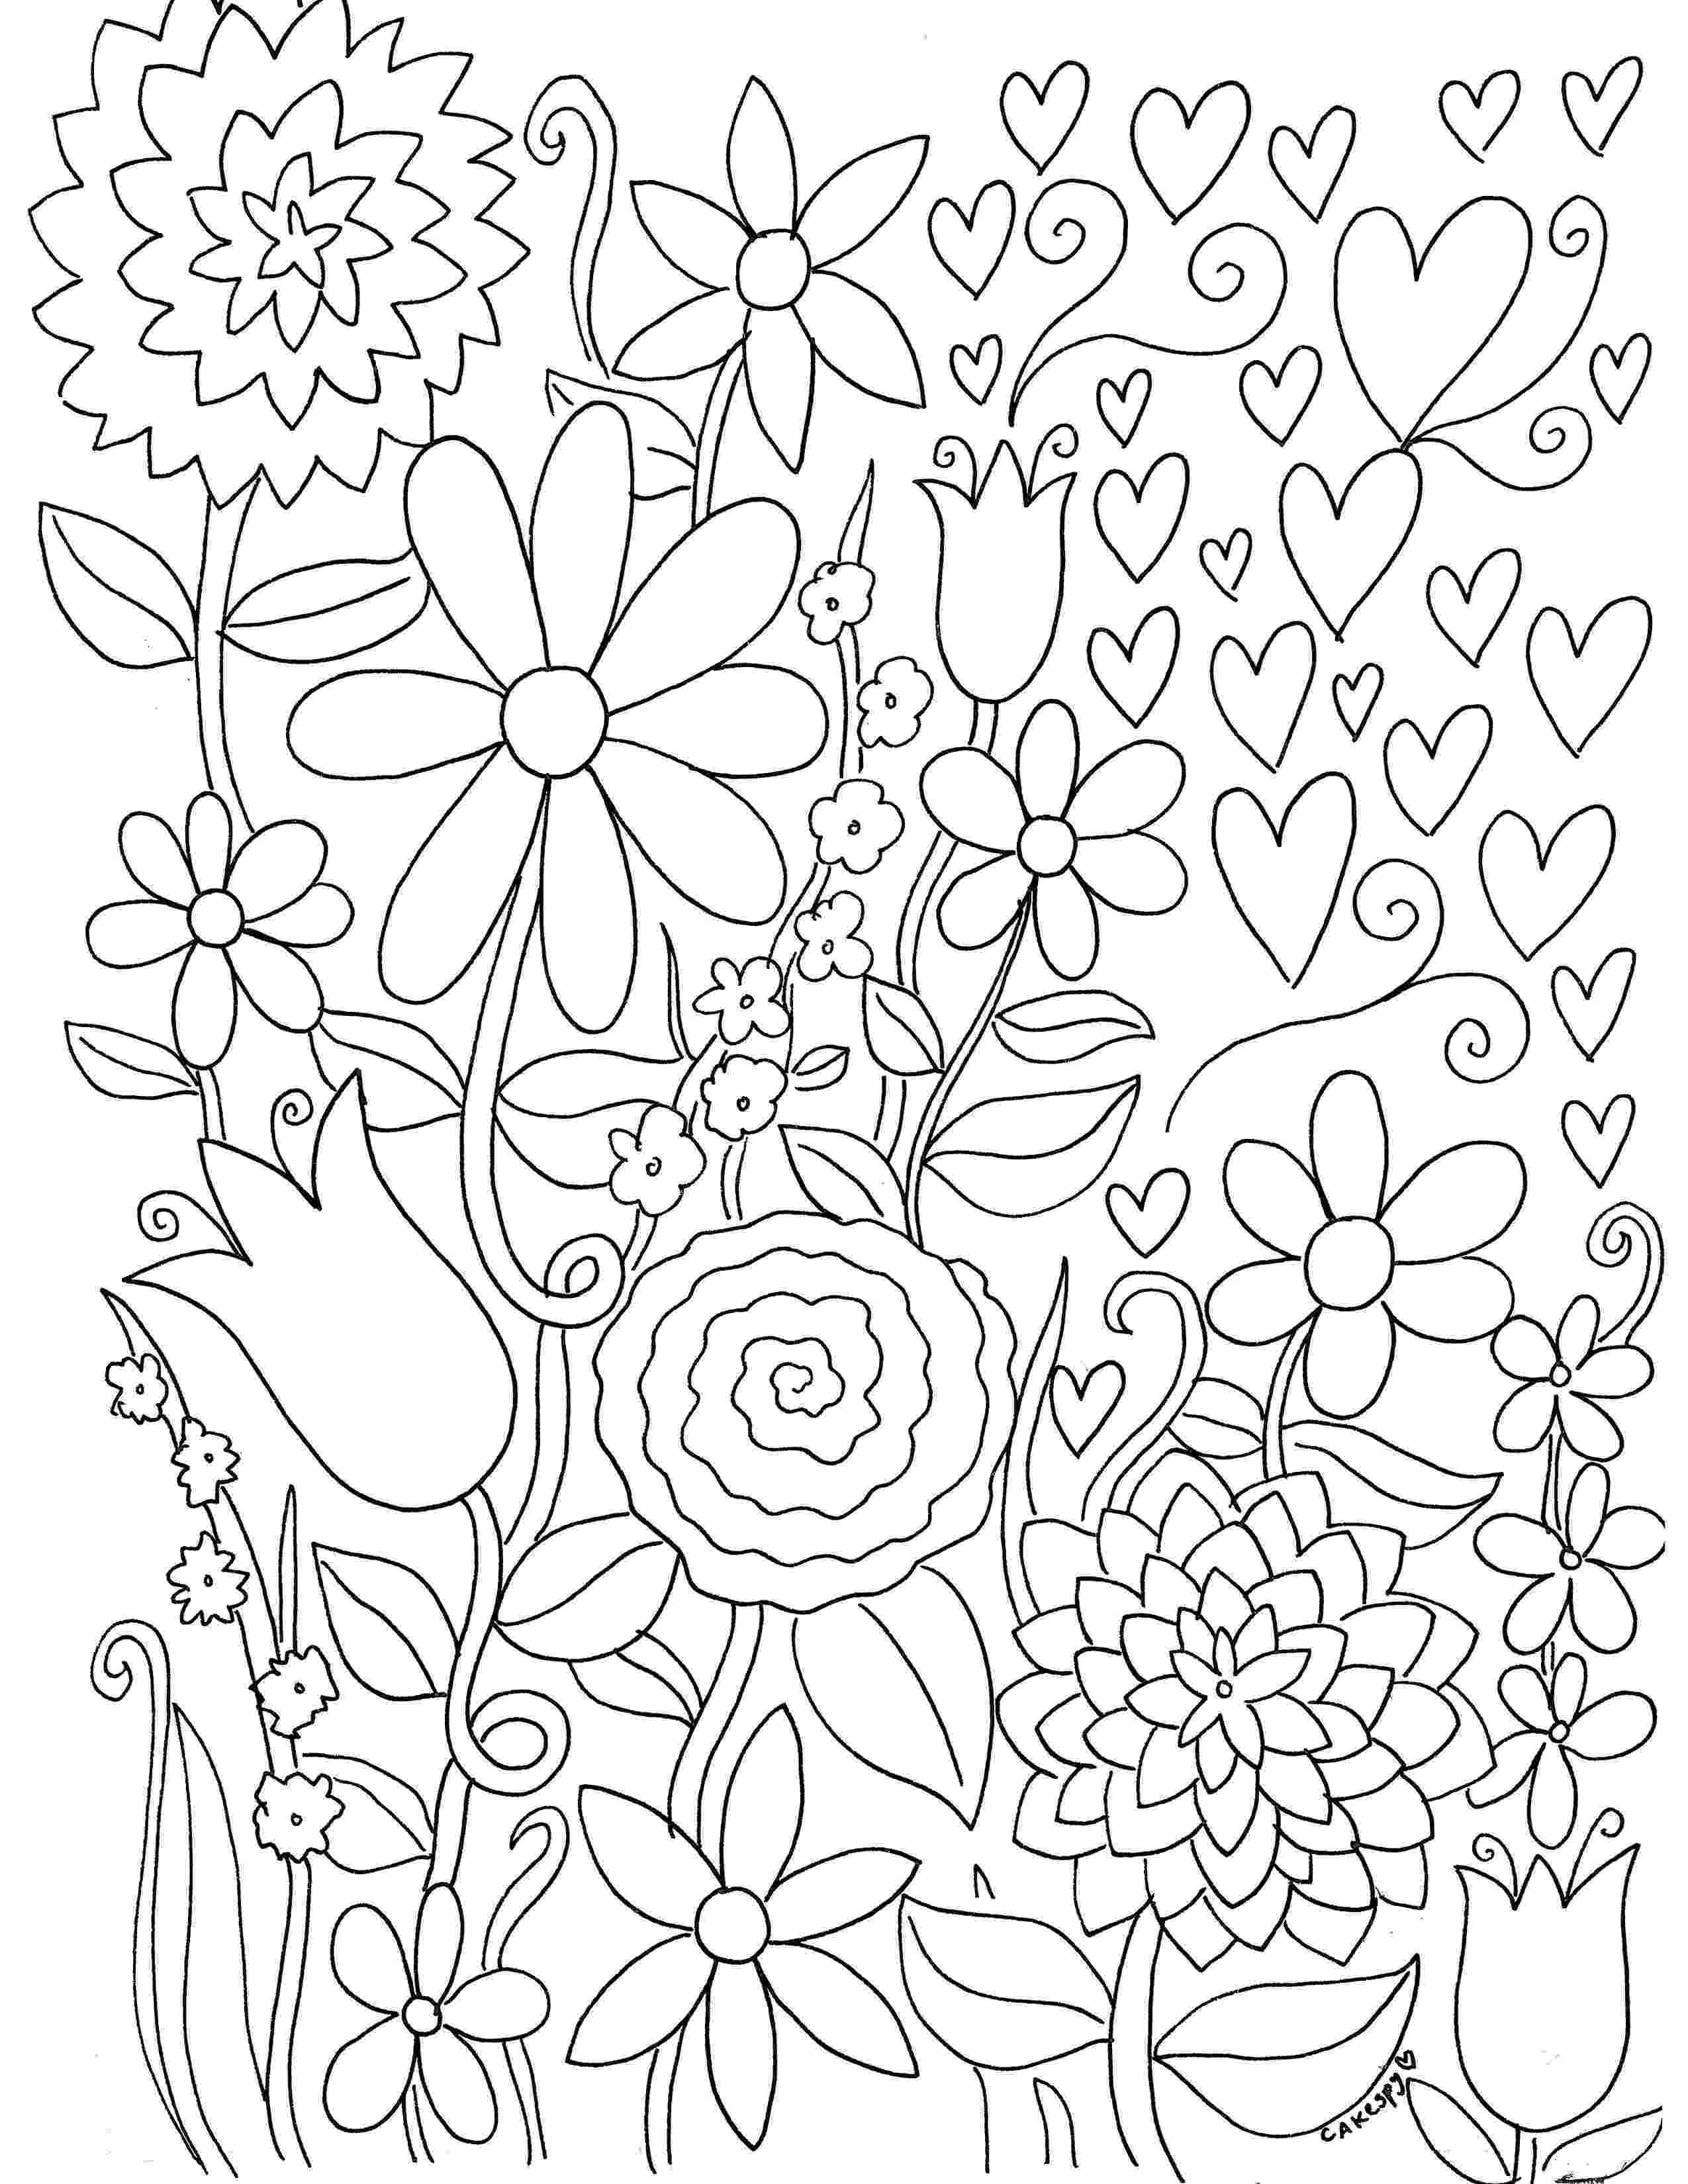 stress relieving coloring book stress relief coloring pages at getcoloringscom free book relieving coloring stress 